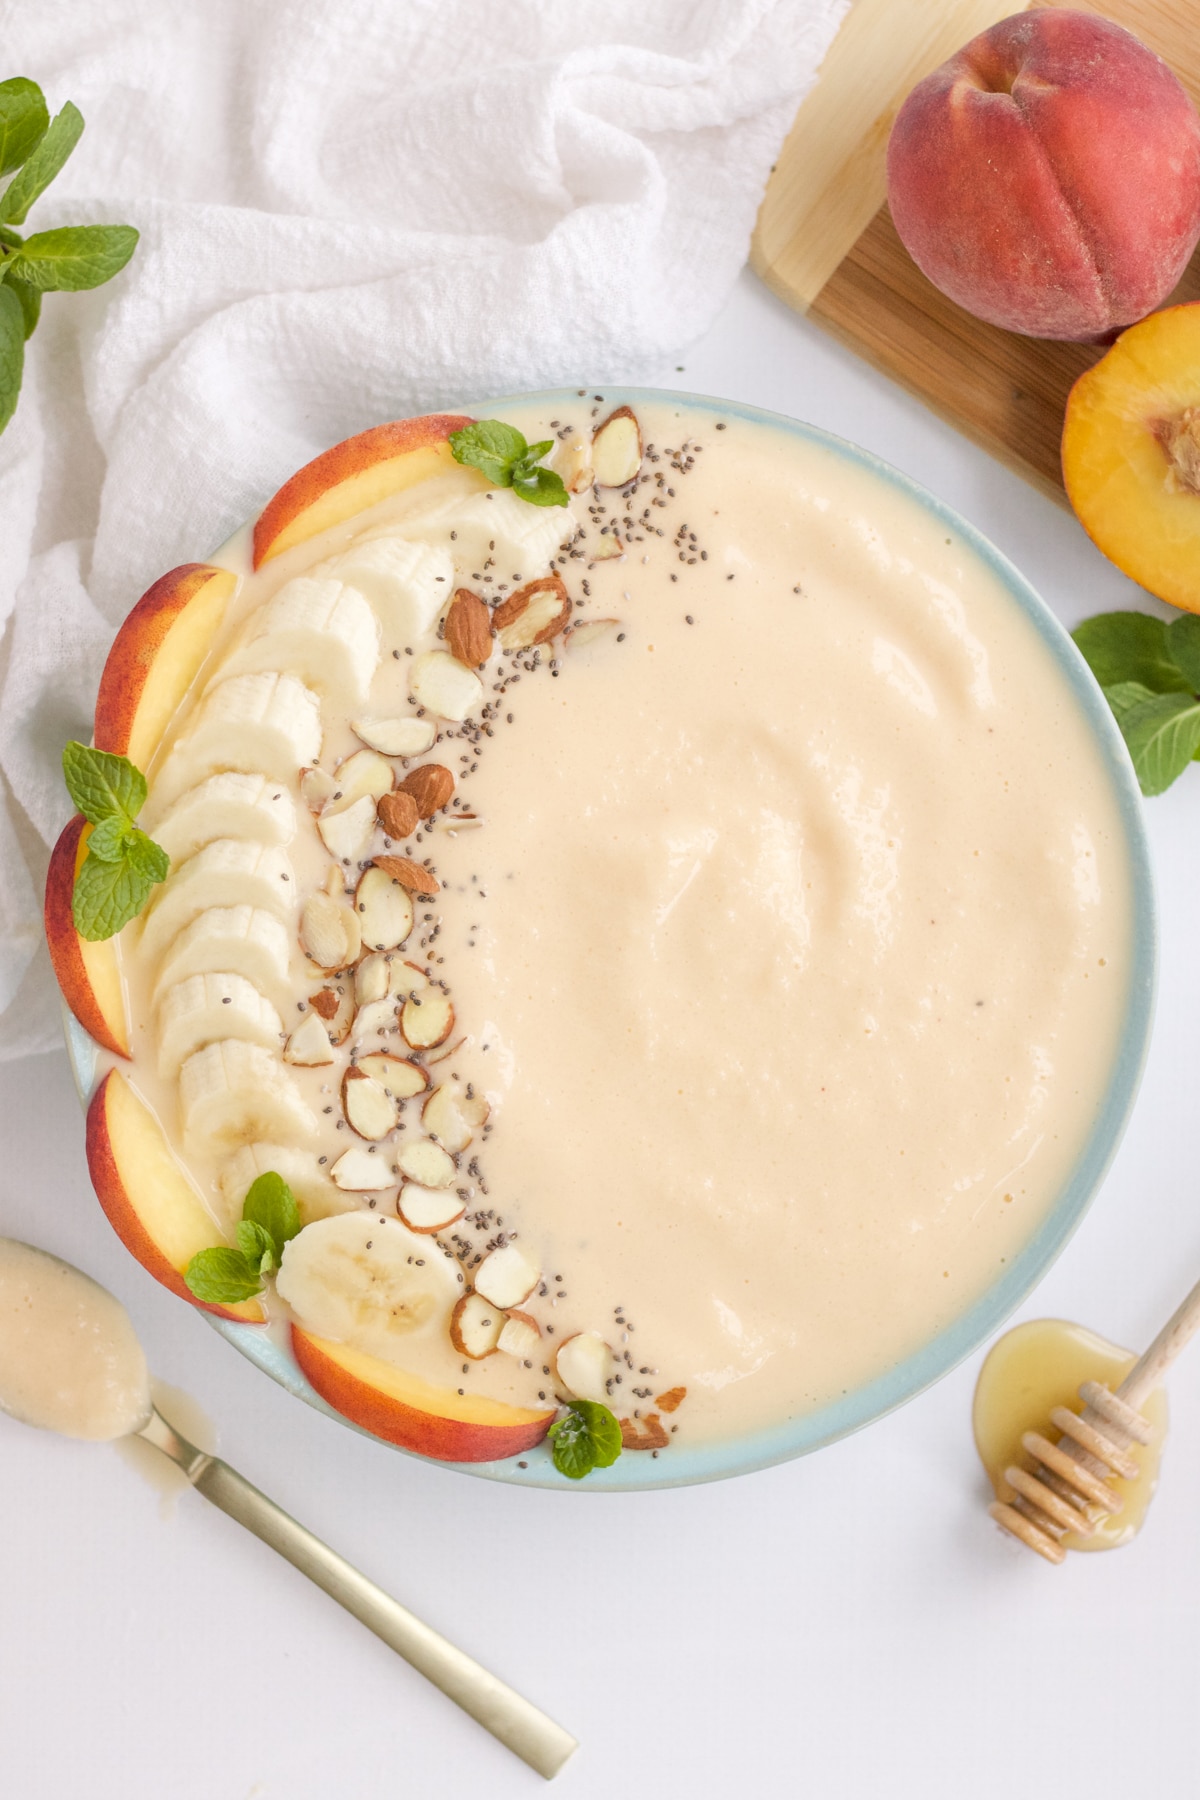 peach smoothie bowl with fresh fruit and nut toppings